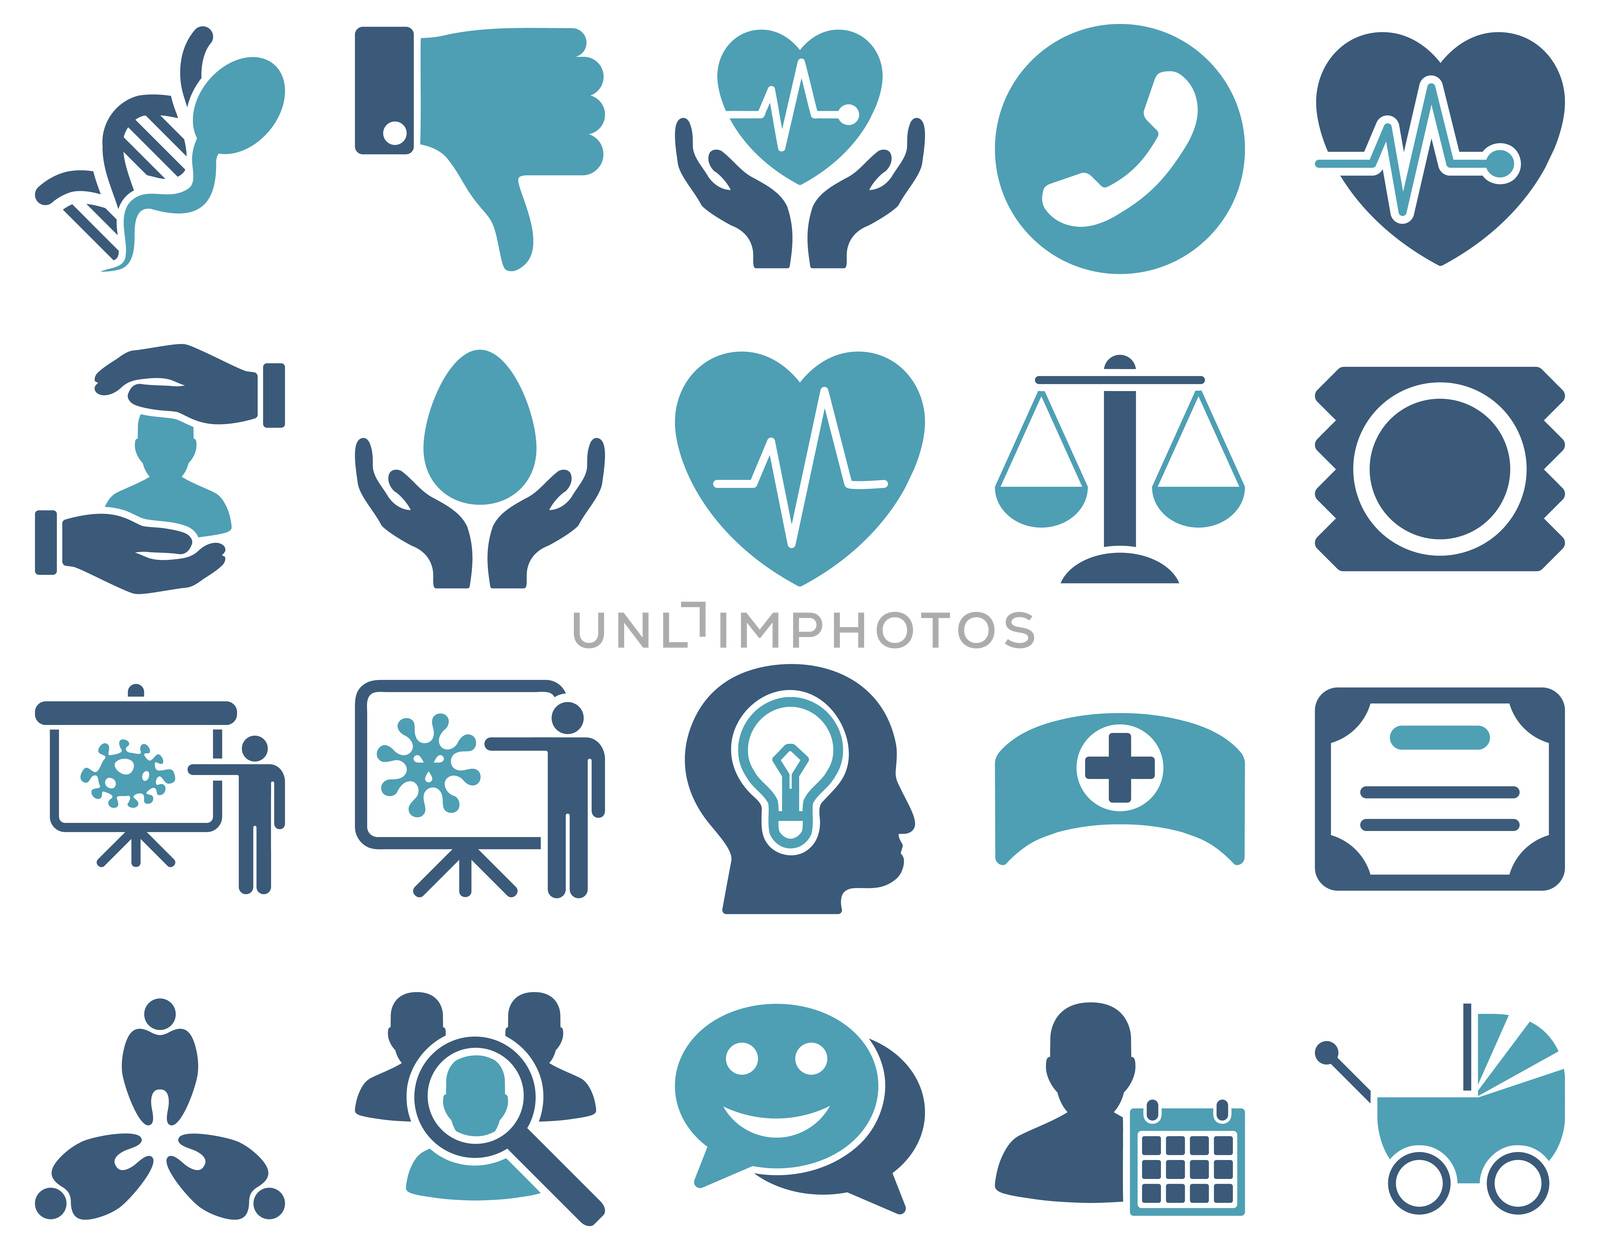 Medical icon set. Style: bicolor icons drawn with cyan and blue colors on a white background.